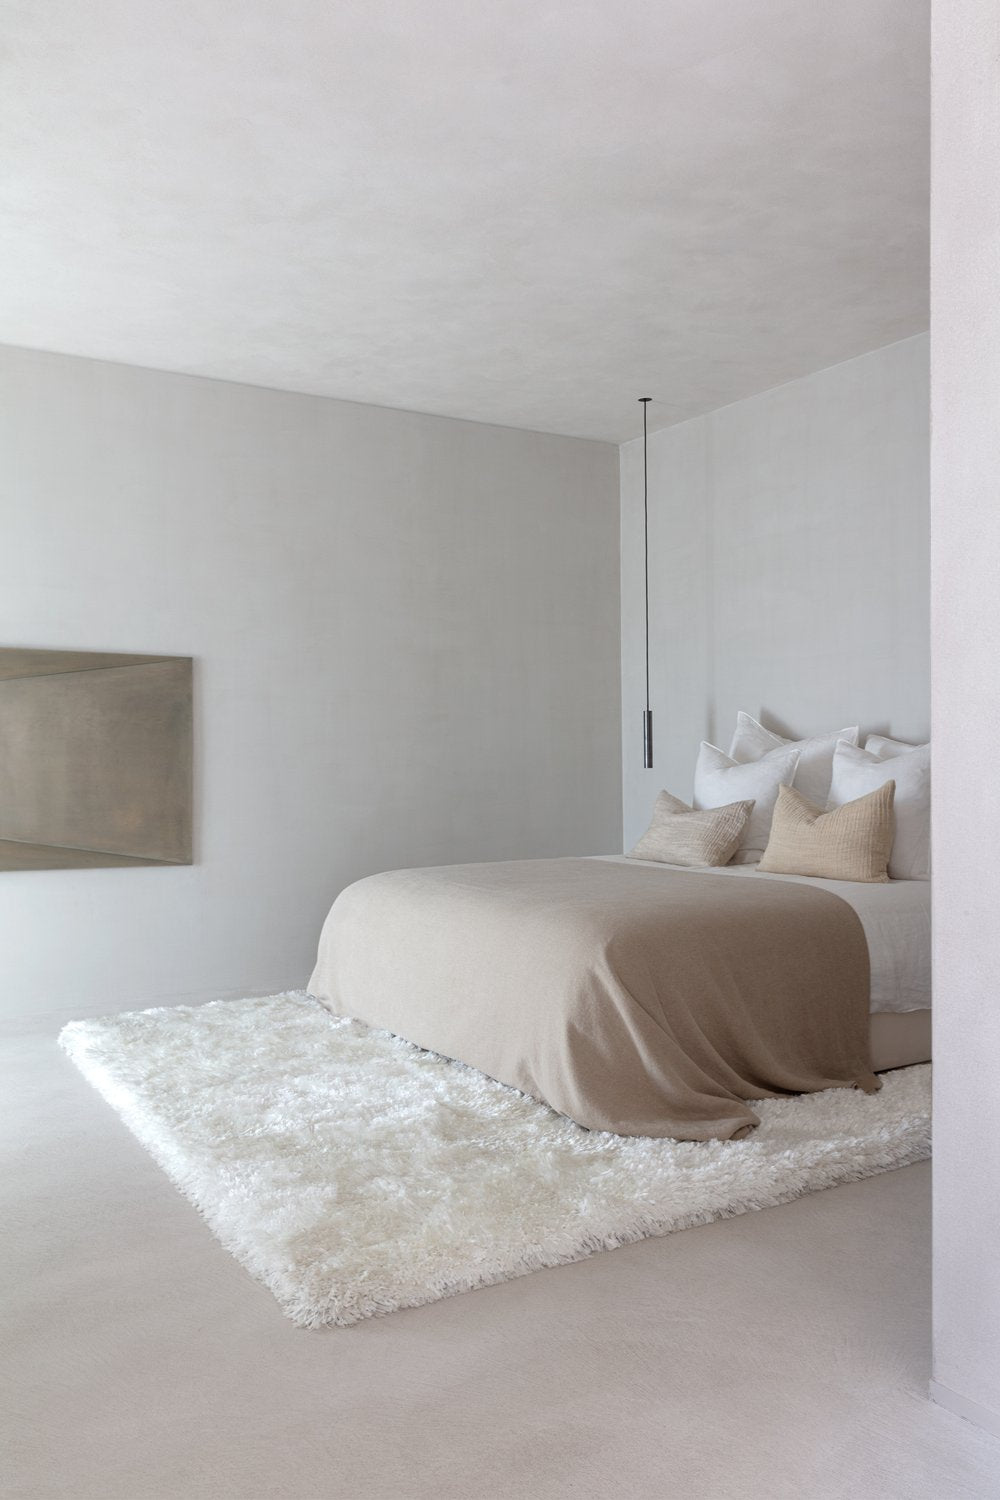 Essential dos and don'ts for styling your master bedroom